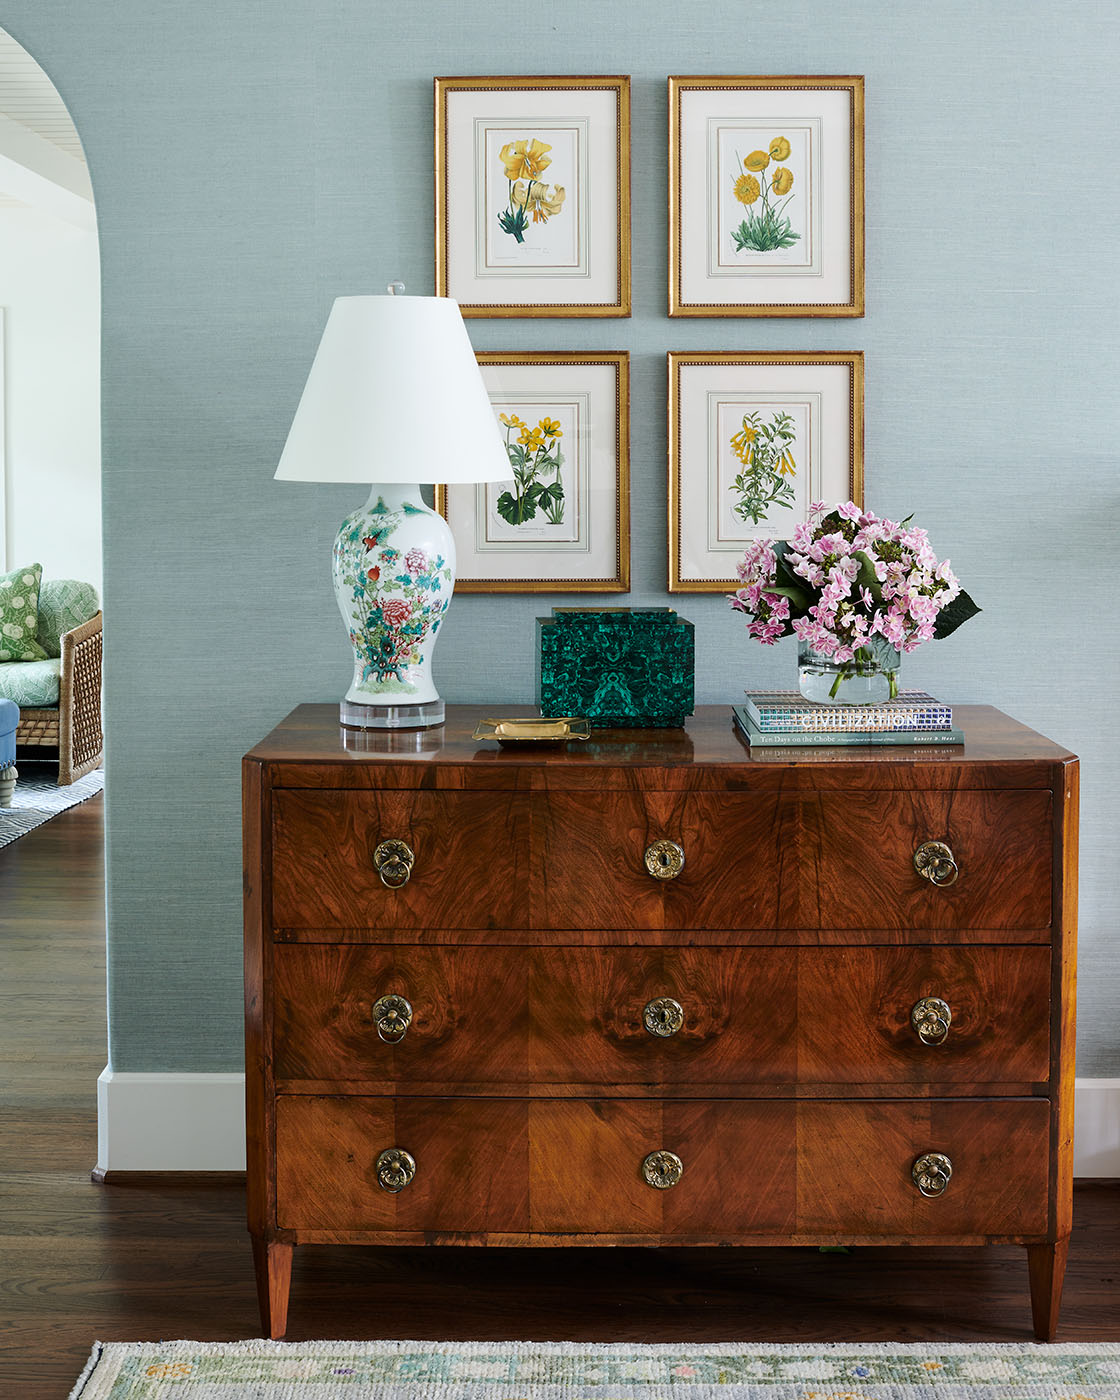 Brown cabinet under grid of prints by Madre design in Southern Living Magazine in Dallas Texas by Alison Gootee Photography